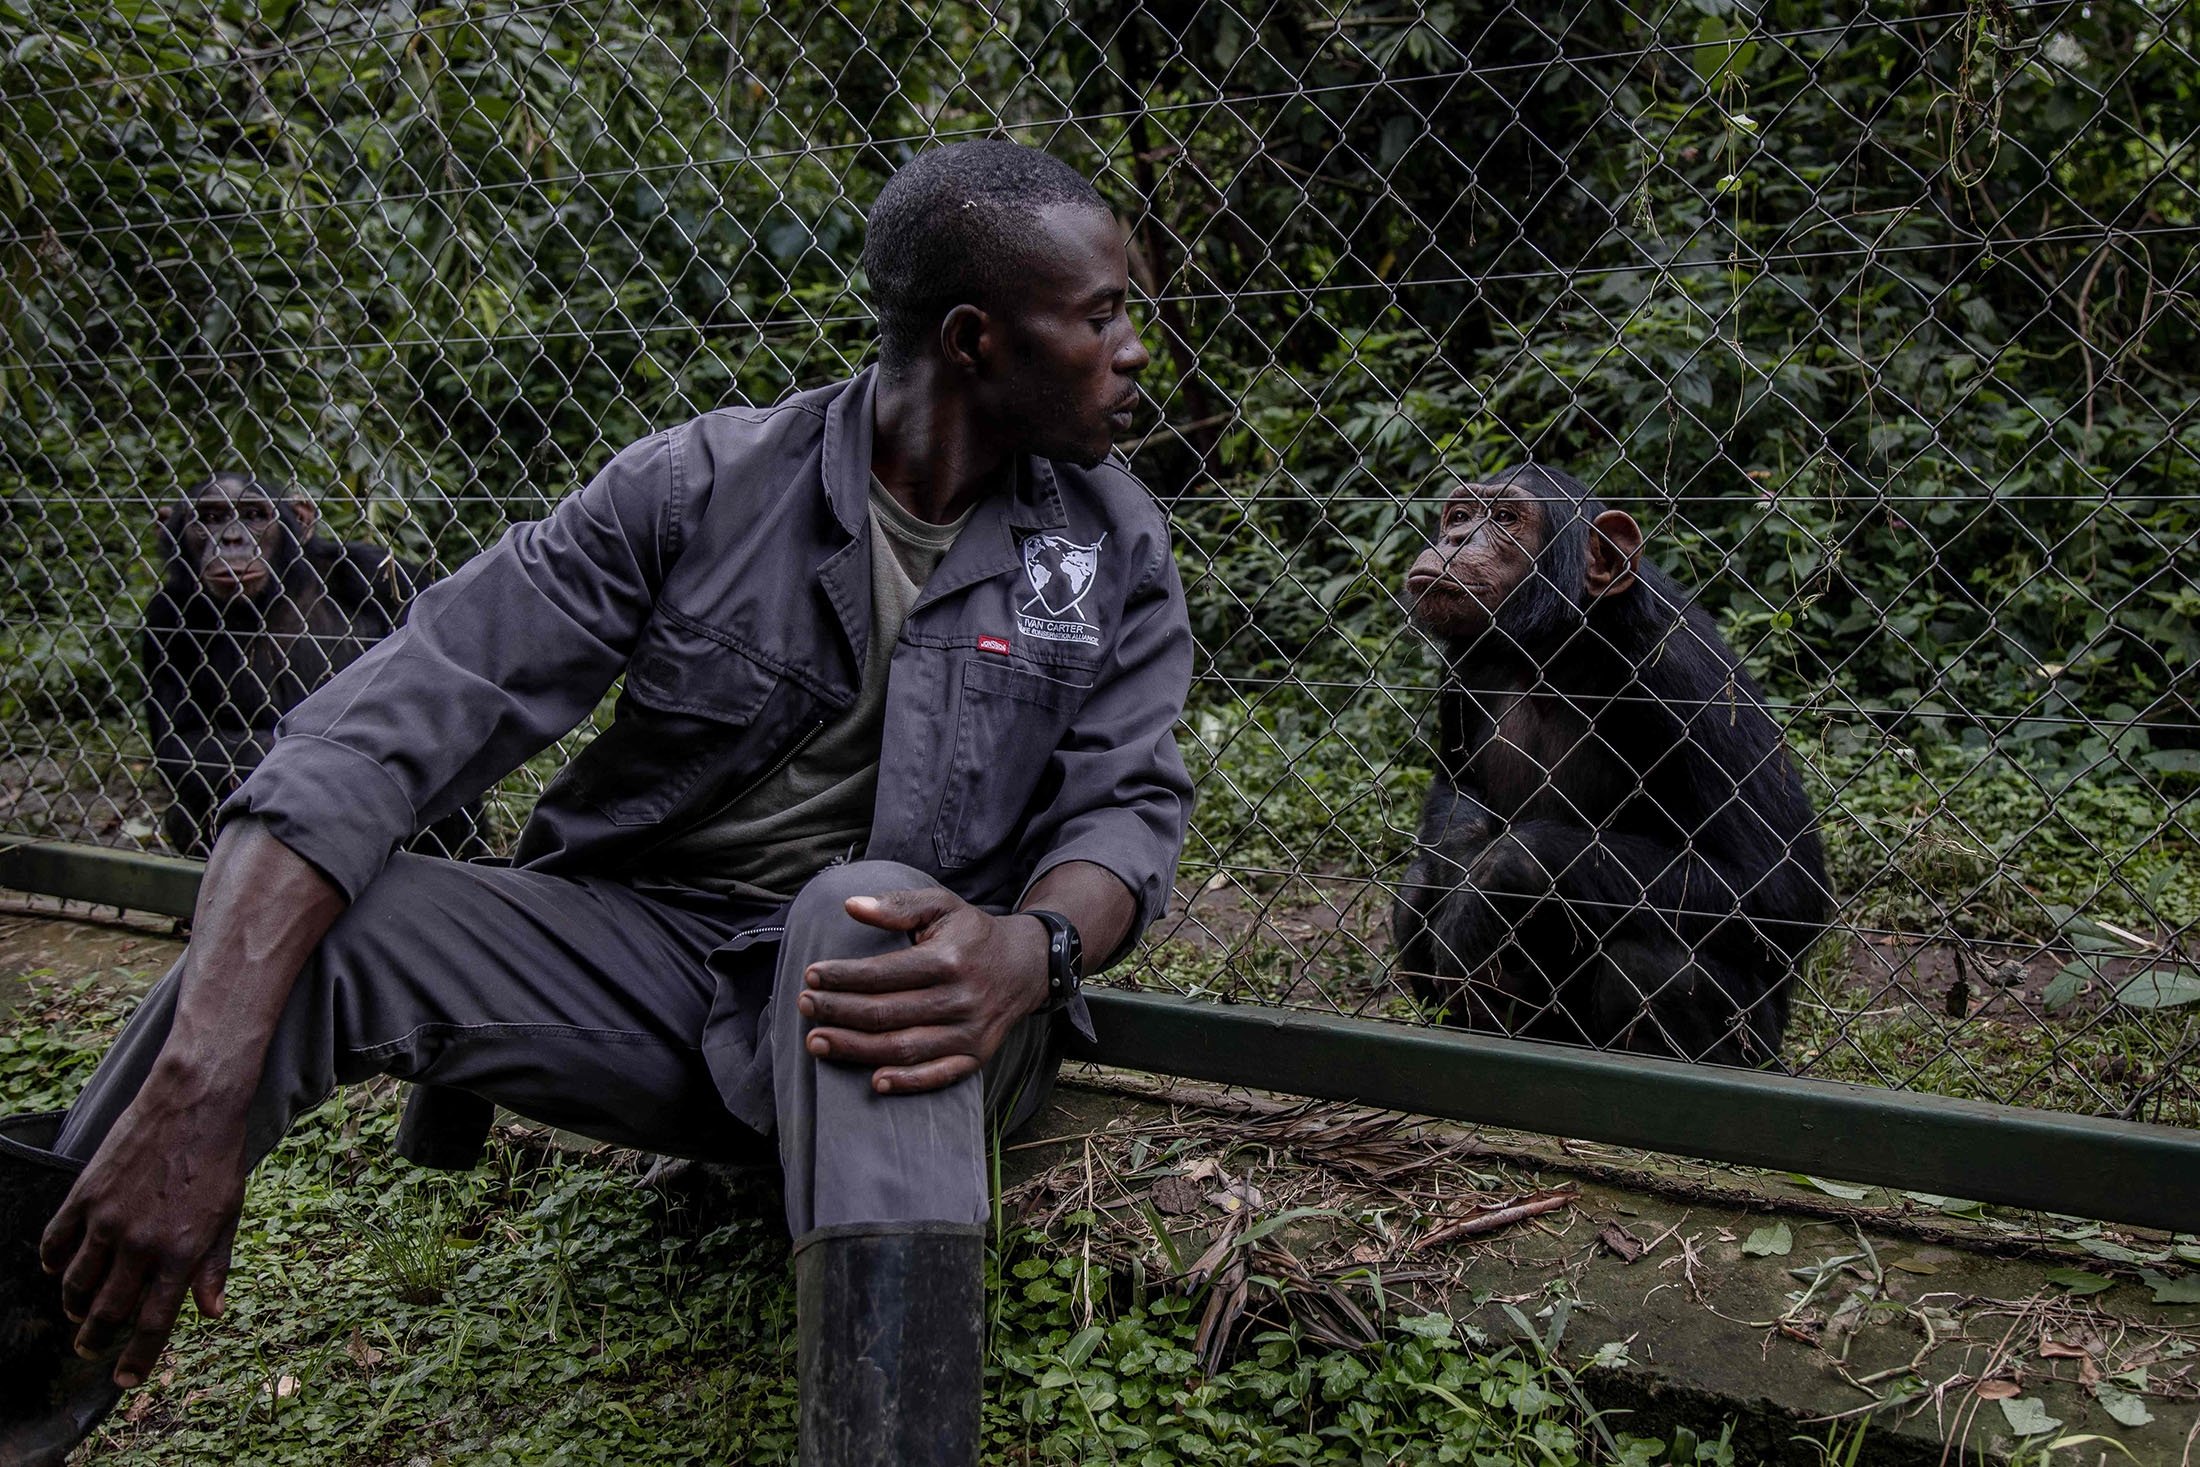 Ombeni Kulimushi plays with a chimpanzee at the Lwiro Primate Rehabilitation Center, in Lwiro, eastern Democratic Republic of Congo, Feb. 14, 2022. (AFP Photo)